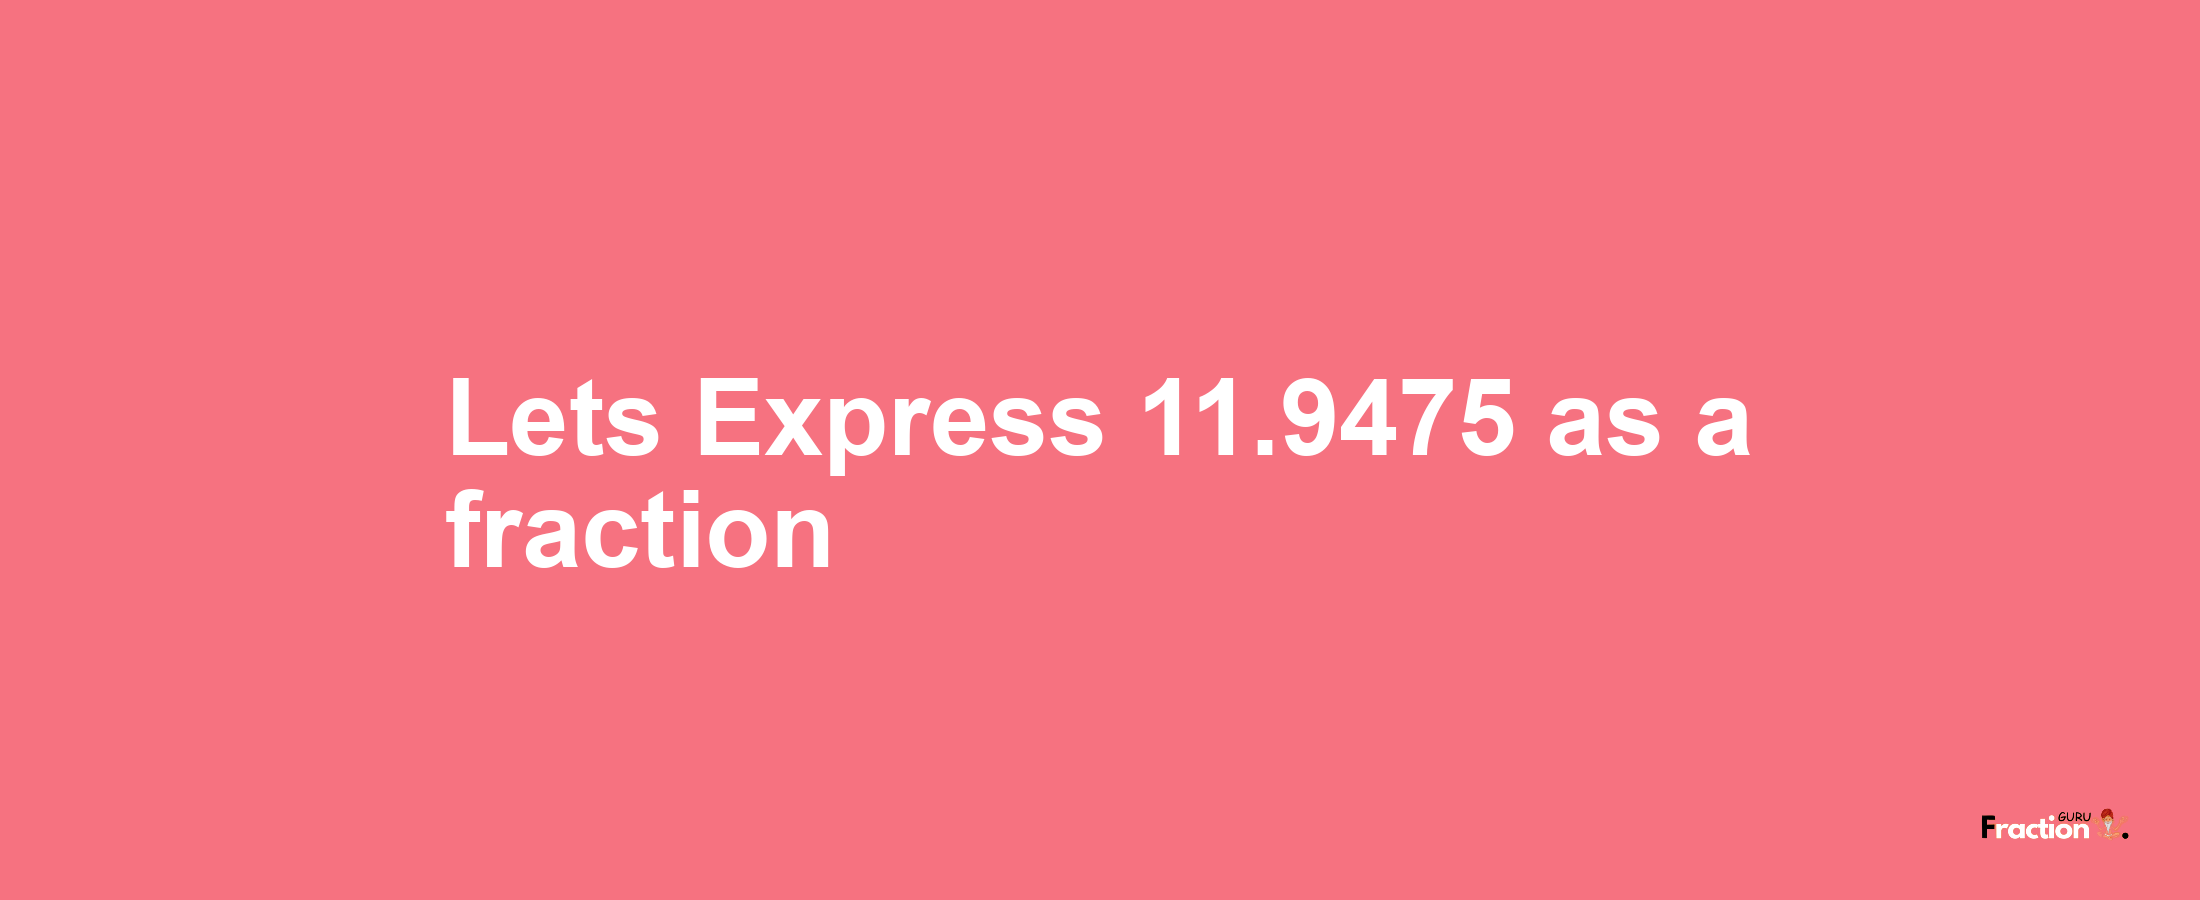 Lets Express 11.9475 as afraction